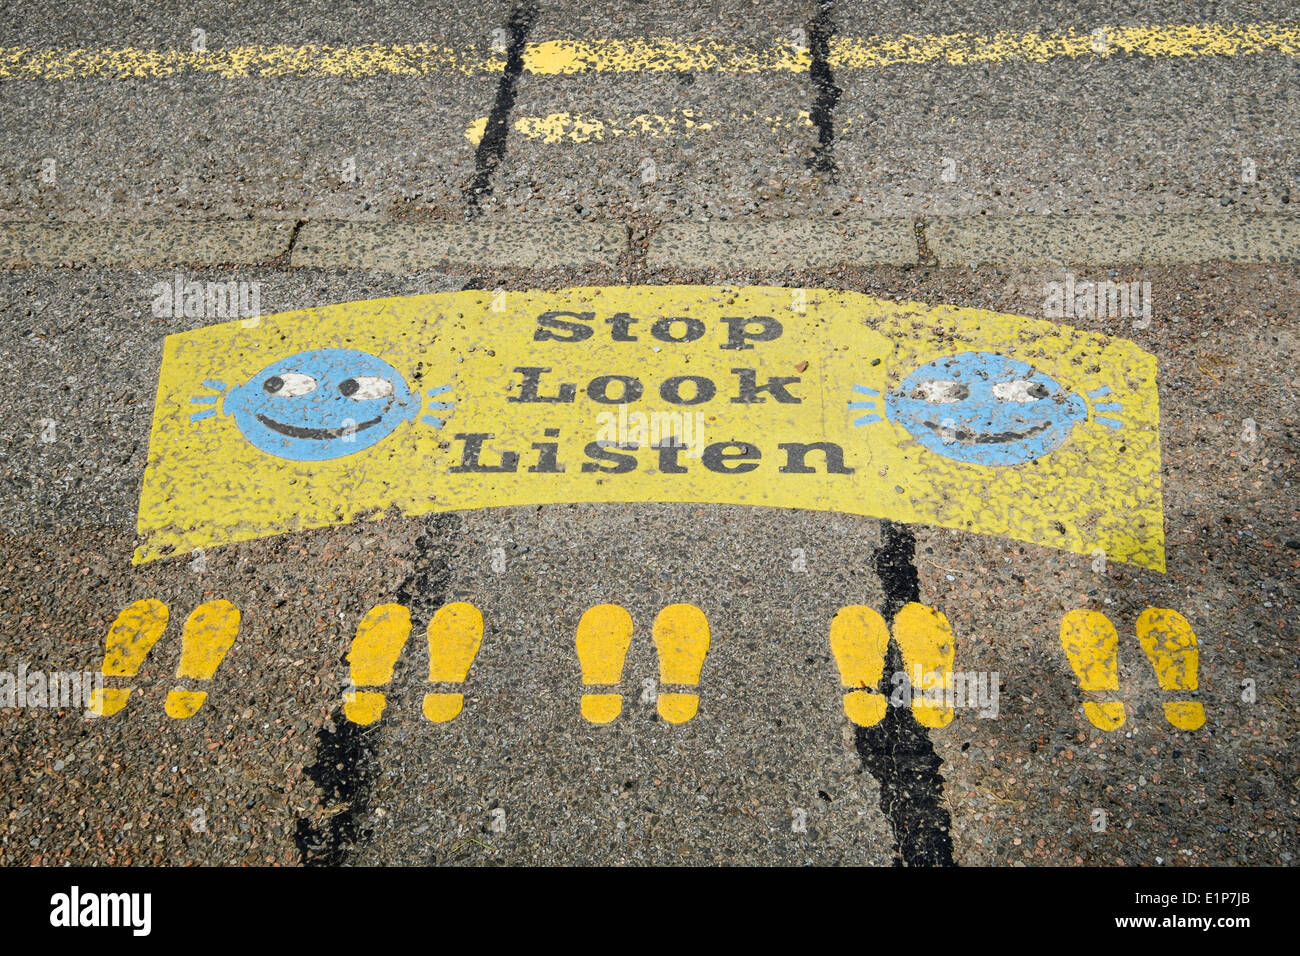 Stop Look Listen sign with smiley faces and footprints painted on a roadside kerb near a primary school road crossing. Scotland UK Britain Stock Photo